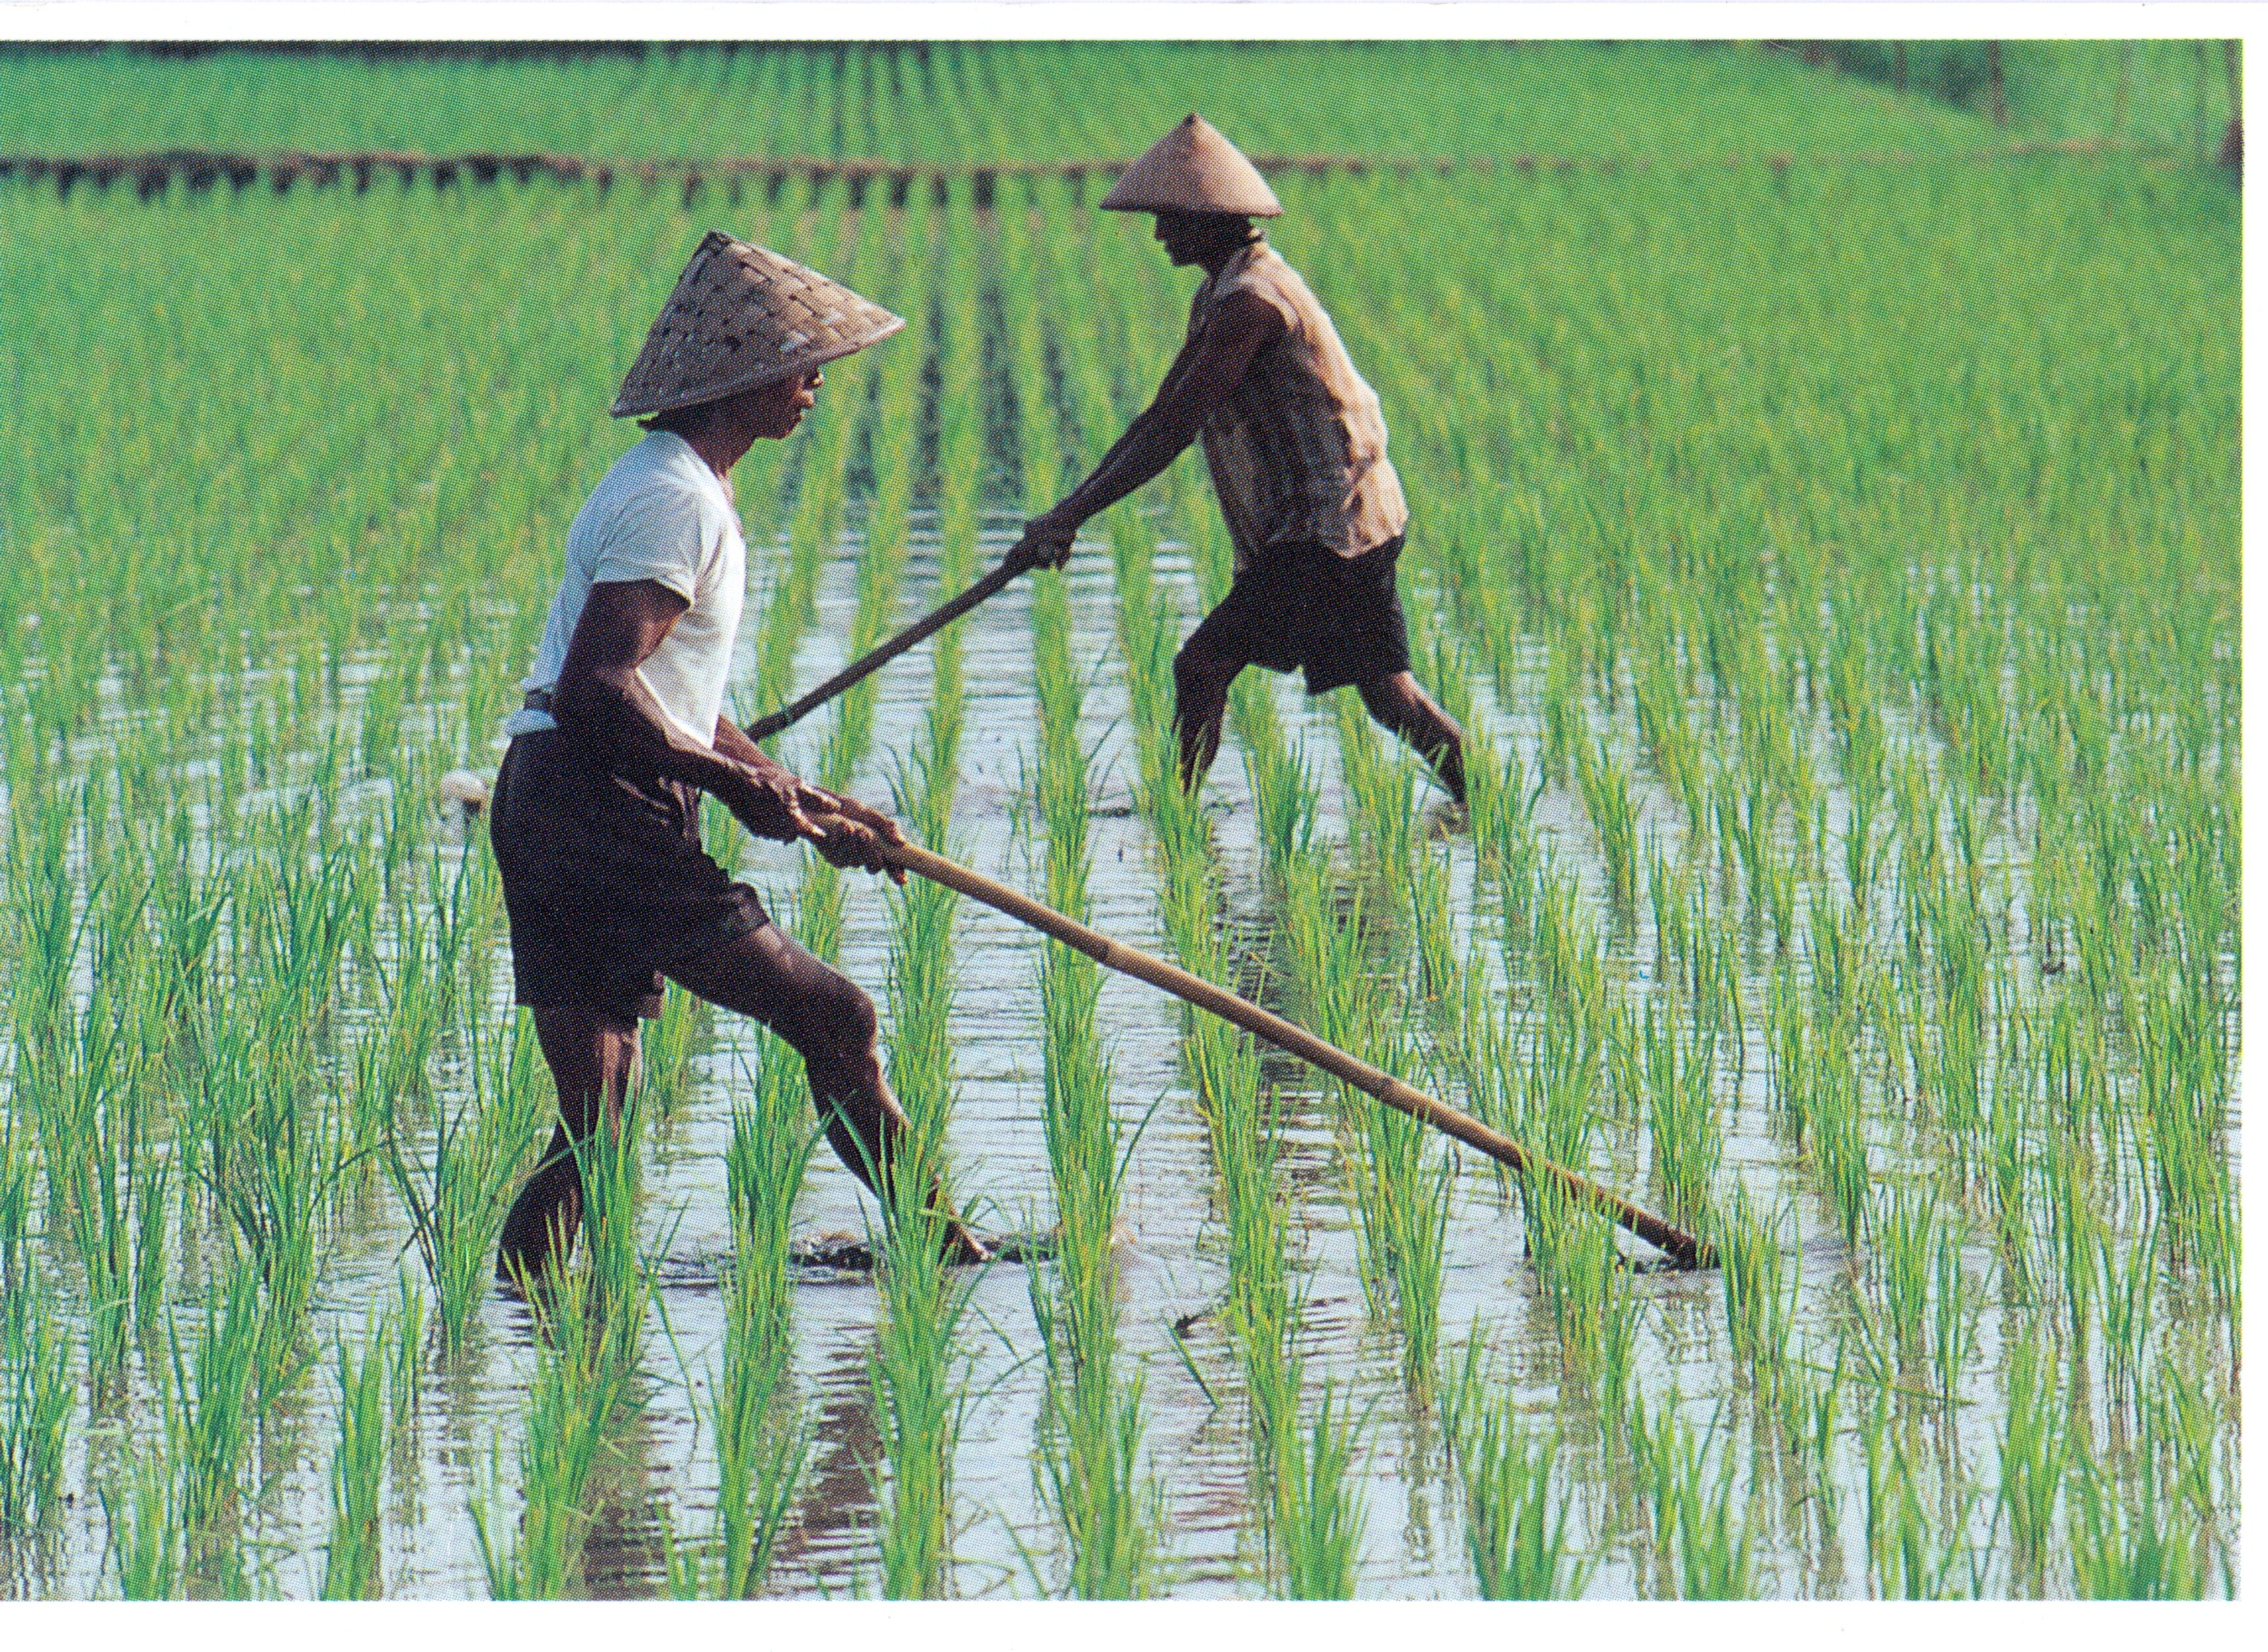 Rice paddies (Royal Geographical Society Picture Library CC BY-NC-SA)